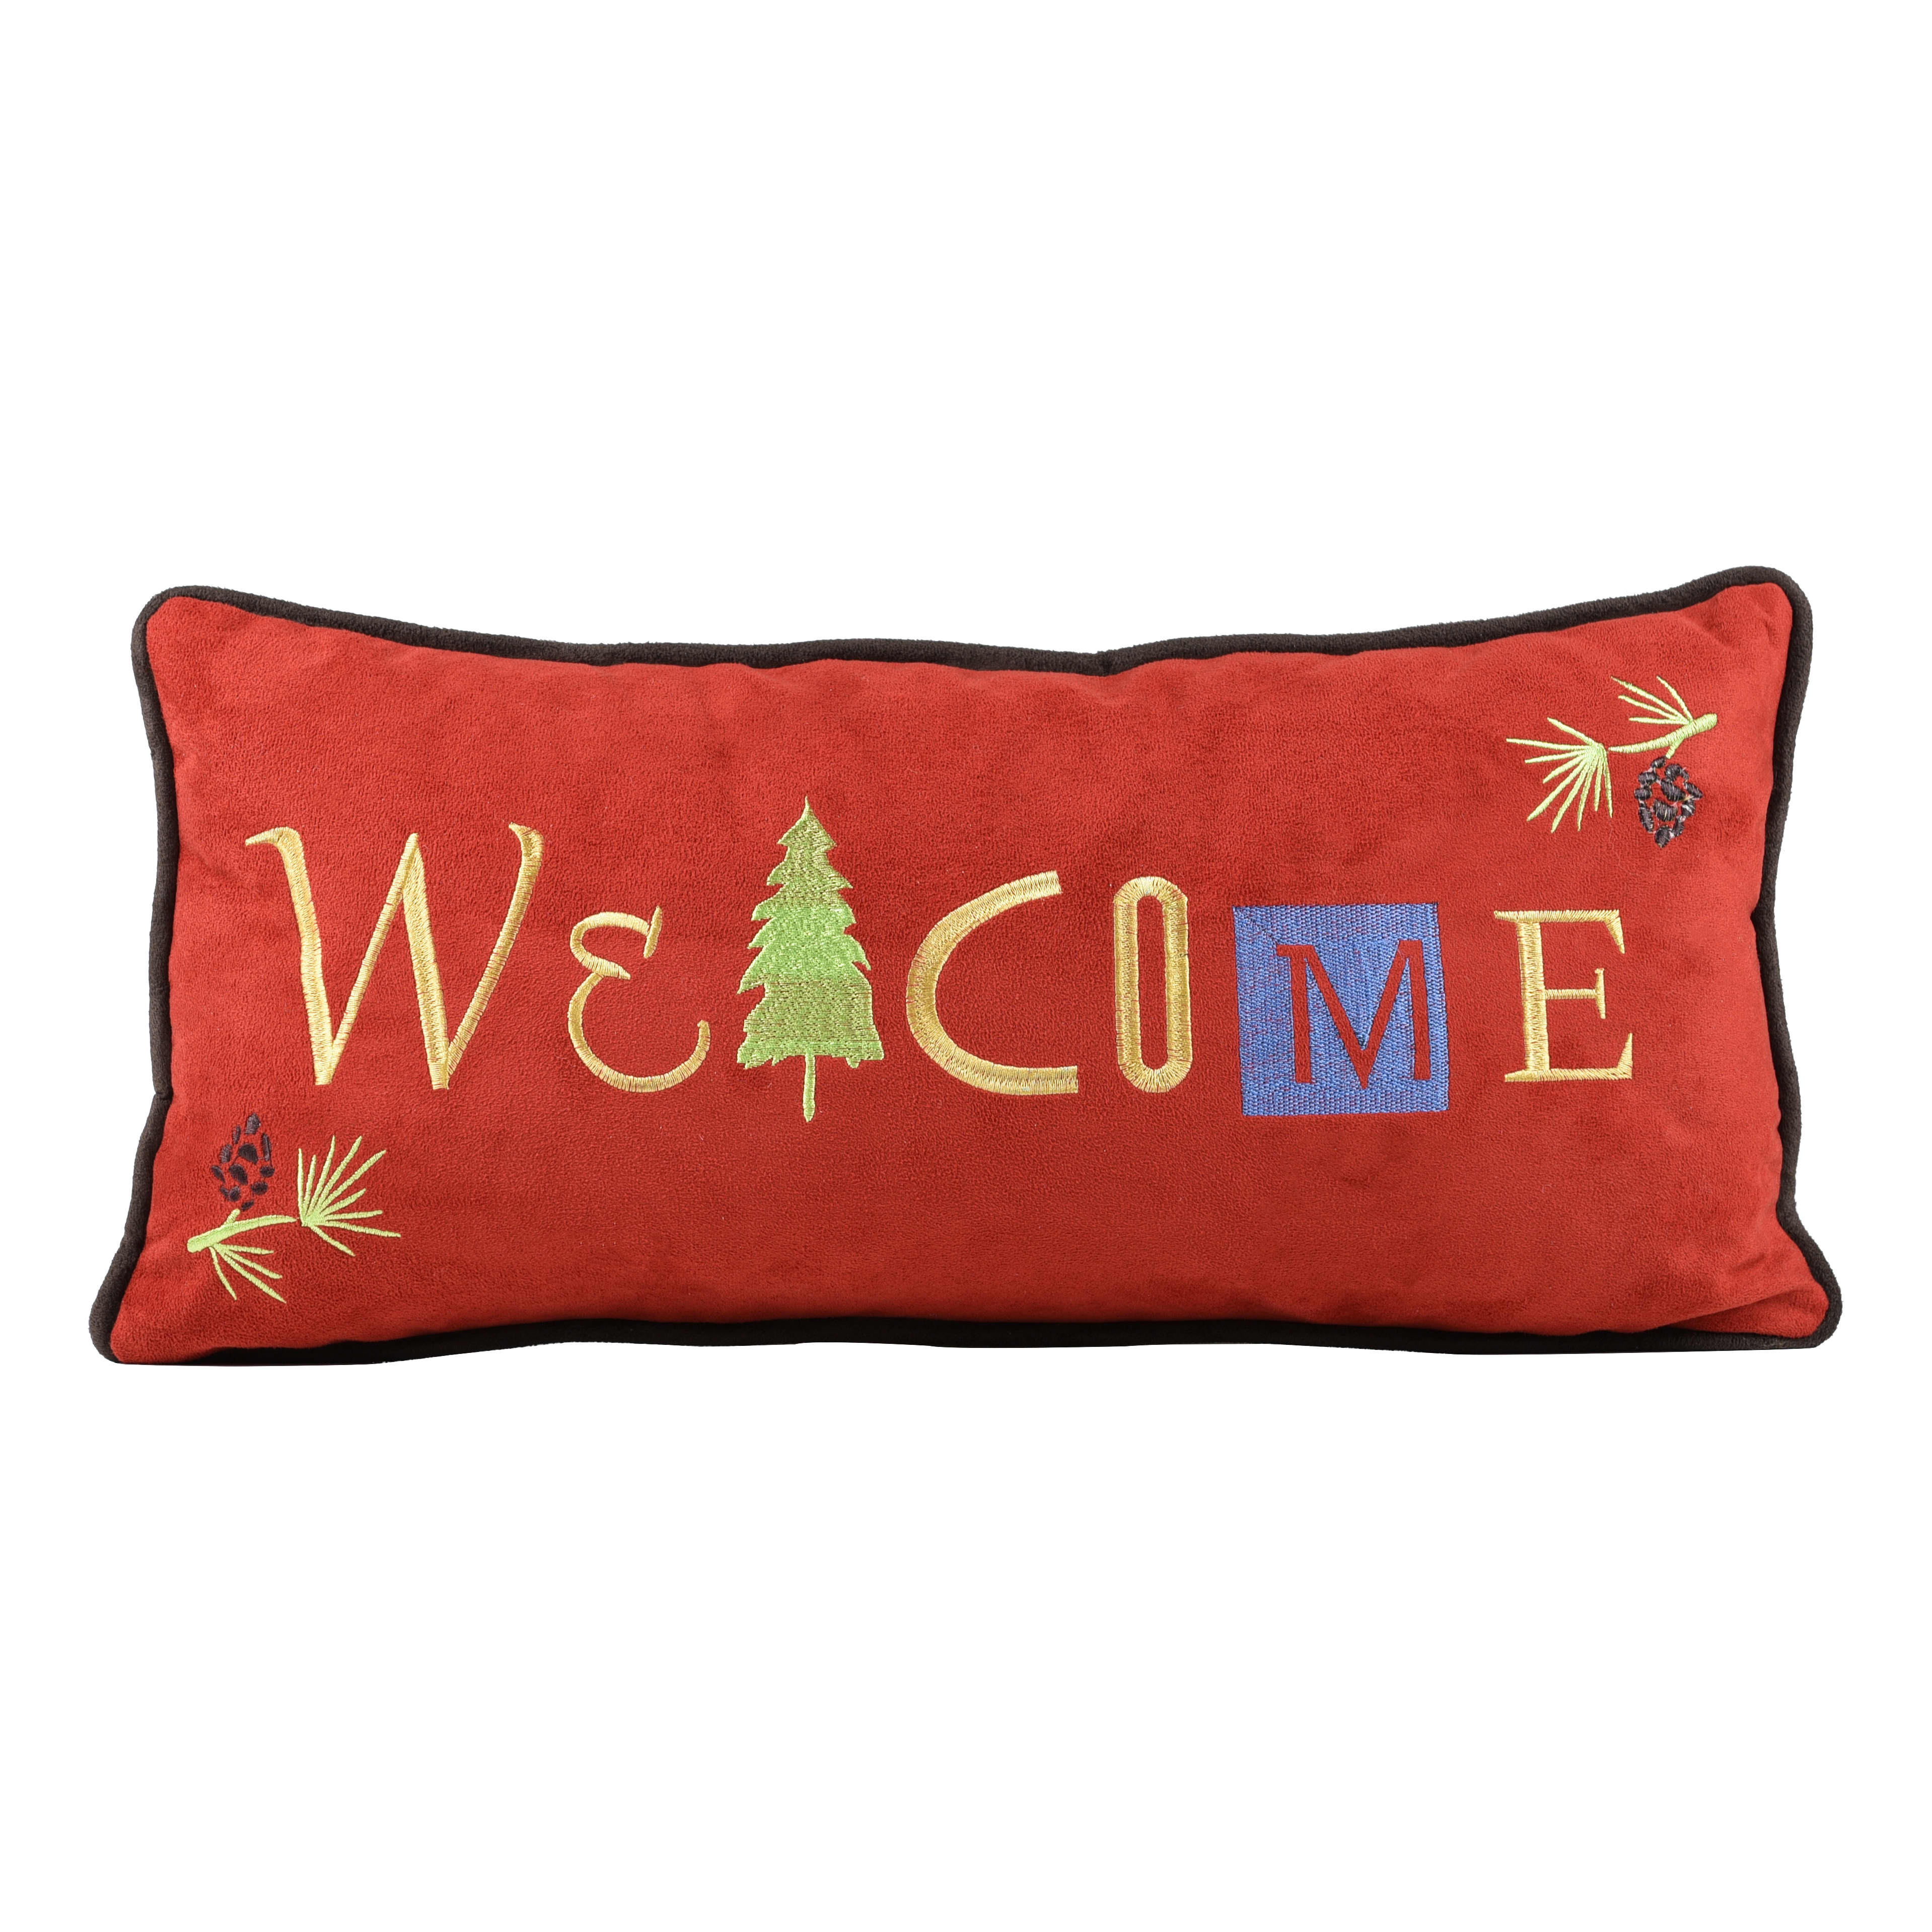 Carstens Chain Stitch Pillows - Welcome